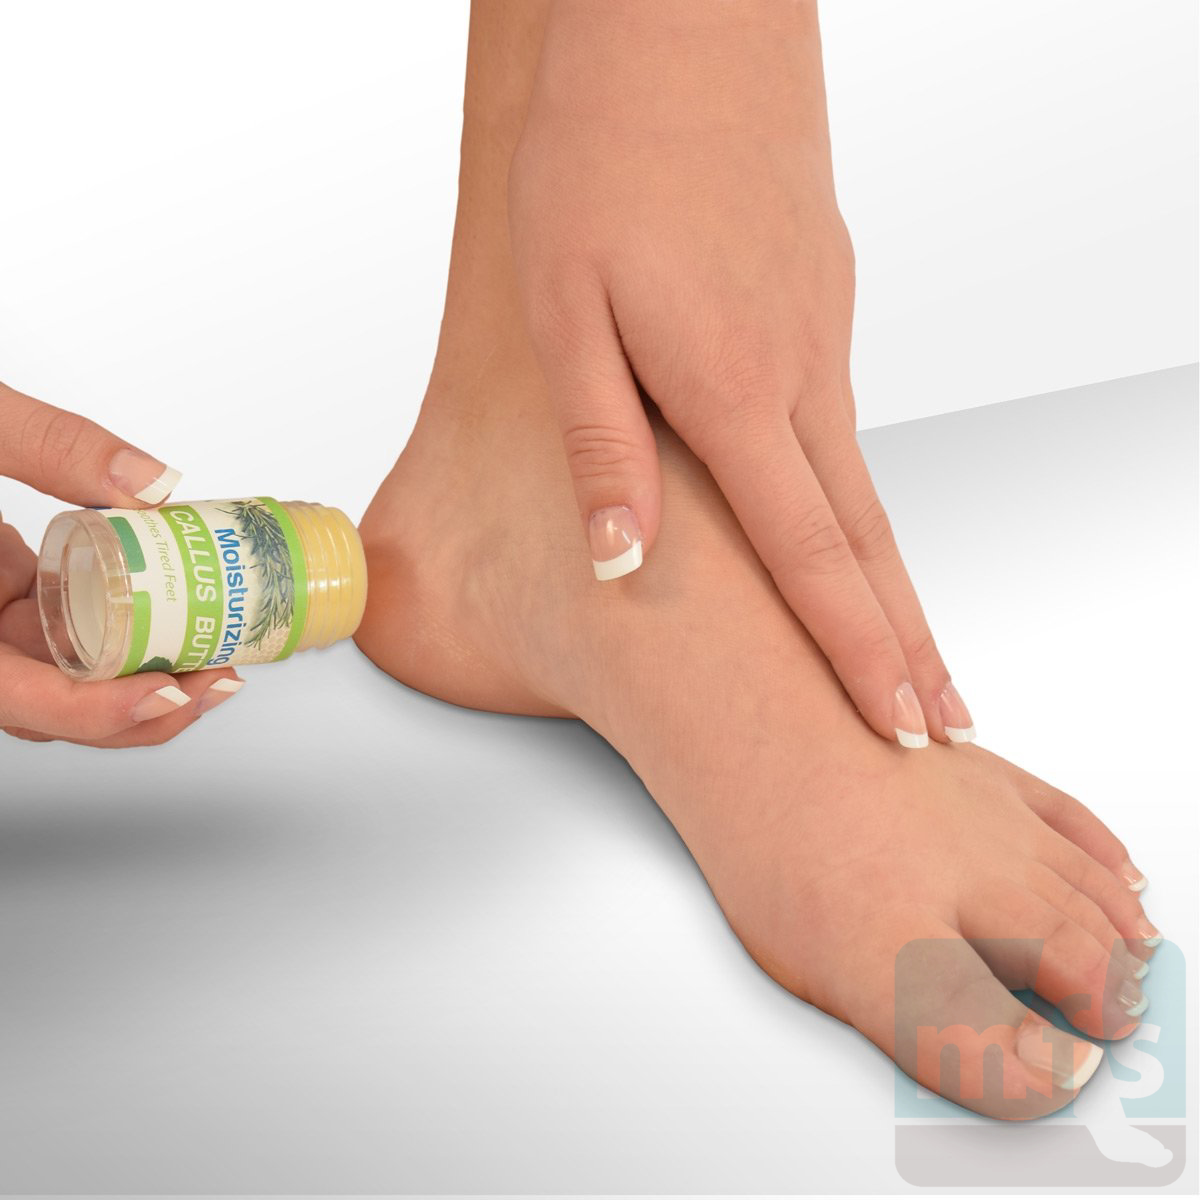 This Callus Eliminator from  Saved My Feet